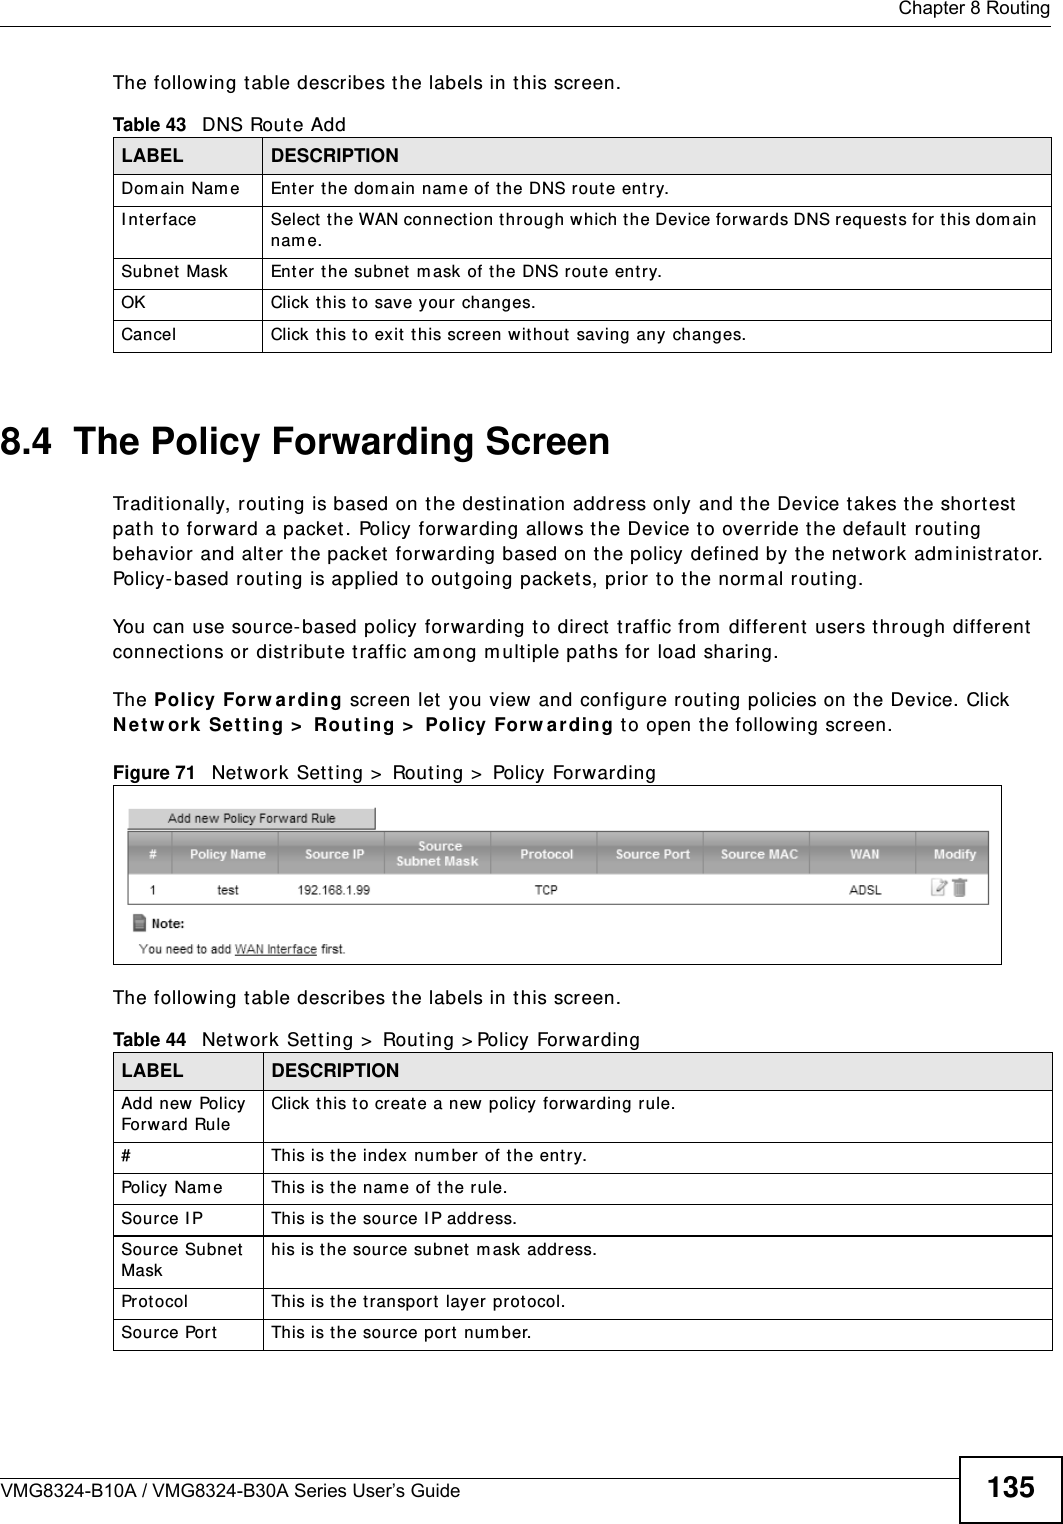  Chapter 8 RoutingVMG8324-B10A / VMG8324-B30A Series User’s Guide 135The following t able describes t he labels in this screen. 8.4  The Policy Forwarding ScreenTradit ionally, routing is based on t he dest inat ion addr ess only and t he Device t akes the shortest  pat h to forward a packet. Policy forwarding allows t he Device t o override t he default rout ing behavior and alter t he packet  forwarding based on the policy defined by the net w ork adm inist rator. Policy-based rout ing is applied t o out going packets, prior t o the norm al routing.You can use source- based policy forwarding to direct  t raffic from  different  users t hrough different  connect ions or distribute t raffic am ong m ultiple paths for load sharing.The Policy For w arding screen let you view and configure rout ing policies on t he Device. Click N e t w ork Se t t ing &gt;  Rout in g &gt;  Policy For w a rding to open the follow ing screen.Figure 71   Net work Sett ing &gt;  Rout ing &gt;  Policy ForwardingThe following t able describes t he labels in this screen. Table 43   DNS Rout e AddLABEL DESCRIPTIONDom ain Nam e Ent er the dom ain nam e of t he DNS route entry.I nterface Select the WAN connect ion through which the Device forwards DNS request s for t his dom ain nam e.Subnet  Mask Ent er t he subnet  m ask of t he DNS route ent ry.OK Click this to save your changes.Cancel Click t his to exit  t his screen wit hout  saving any  changes.Table 44   Net work Set t ing &gt;  Rout ing &gt; Policy ForwardingLABEL DESCRIPTIONAdd new Policy  Forward RuleClick t his t o creat e a new policy forwarding rule.#This is t he index num ber of t he entry.Policy Nam e This is the nam e of t he rule.Source I P This is the source I P address.Source Subnet  Maskhis is the source subnet  m ask address.Prot ocol This is the transport layer protocol.Source Port This is t he source port  num ber.